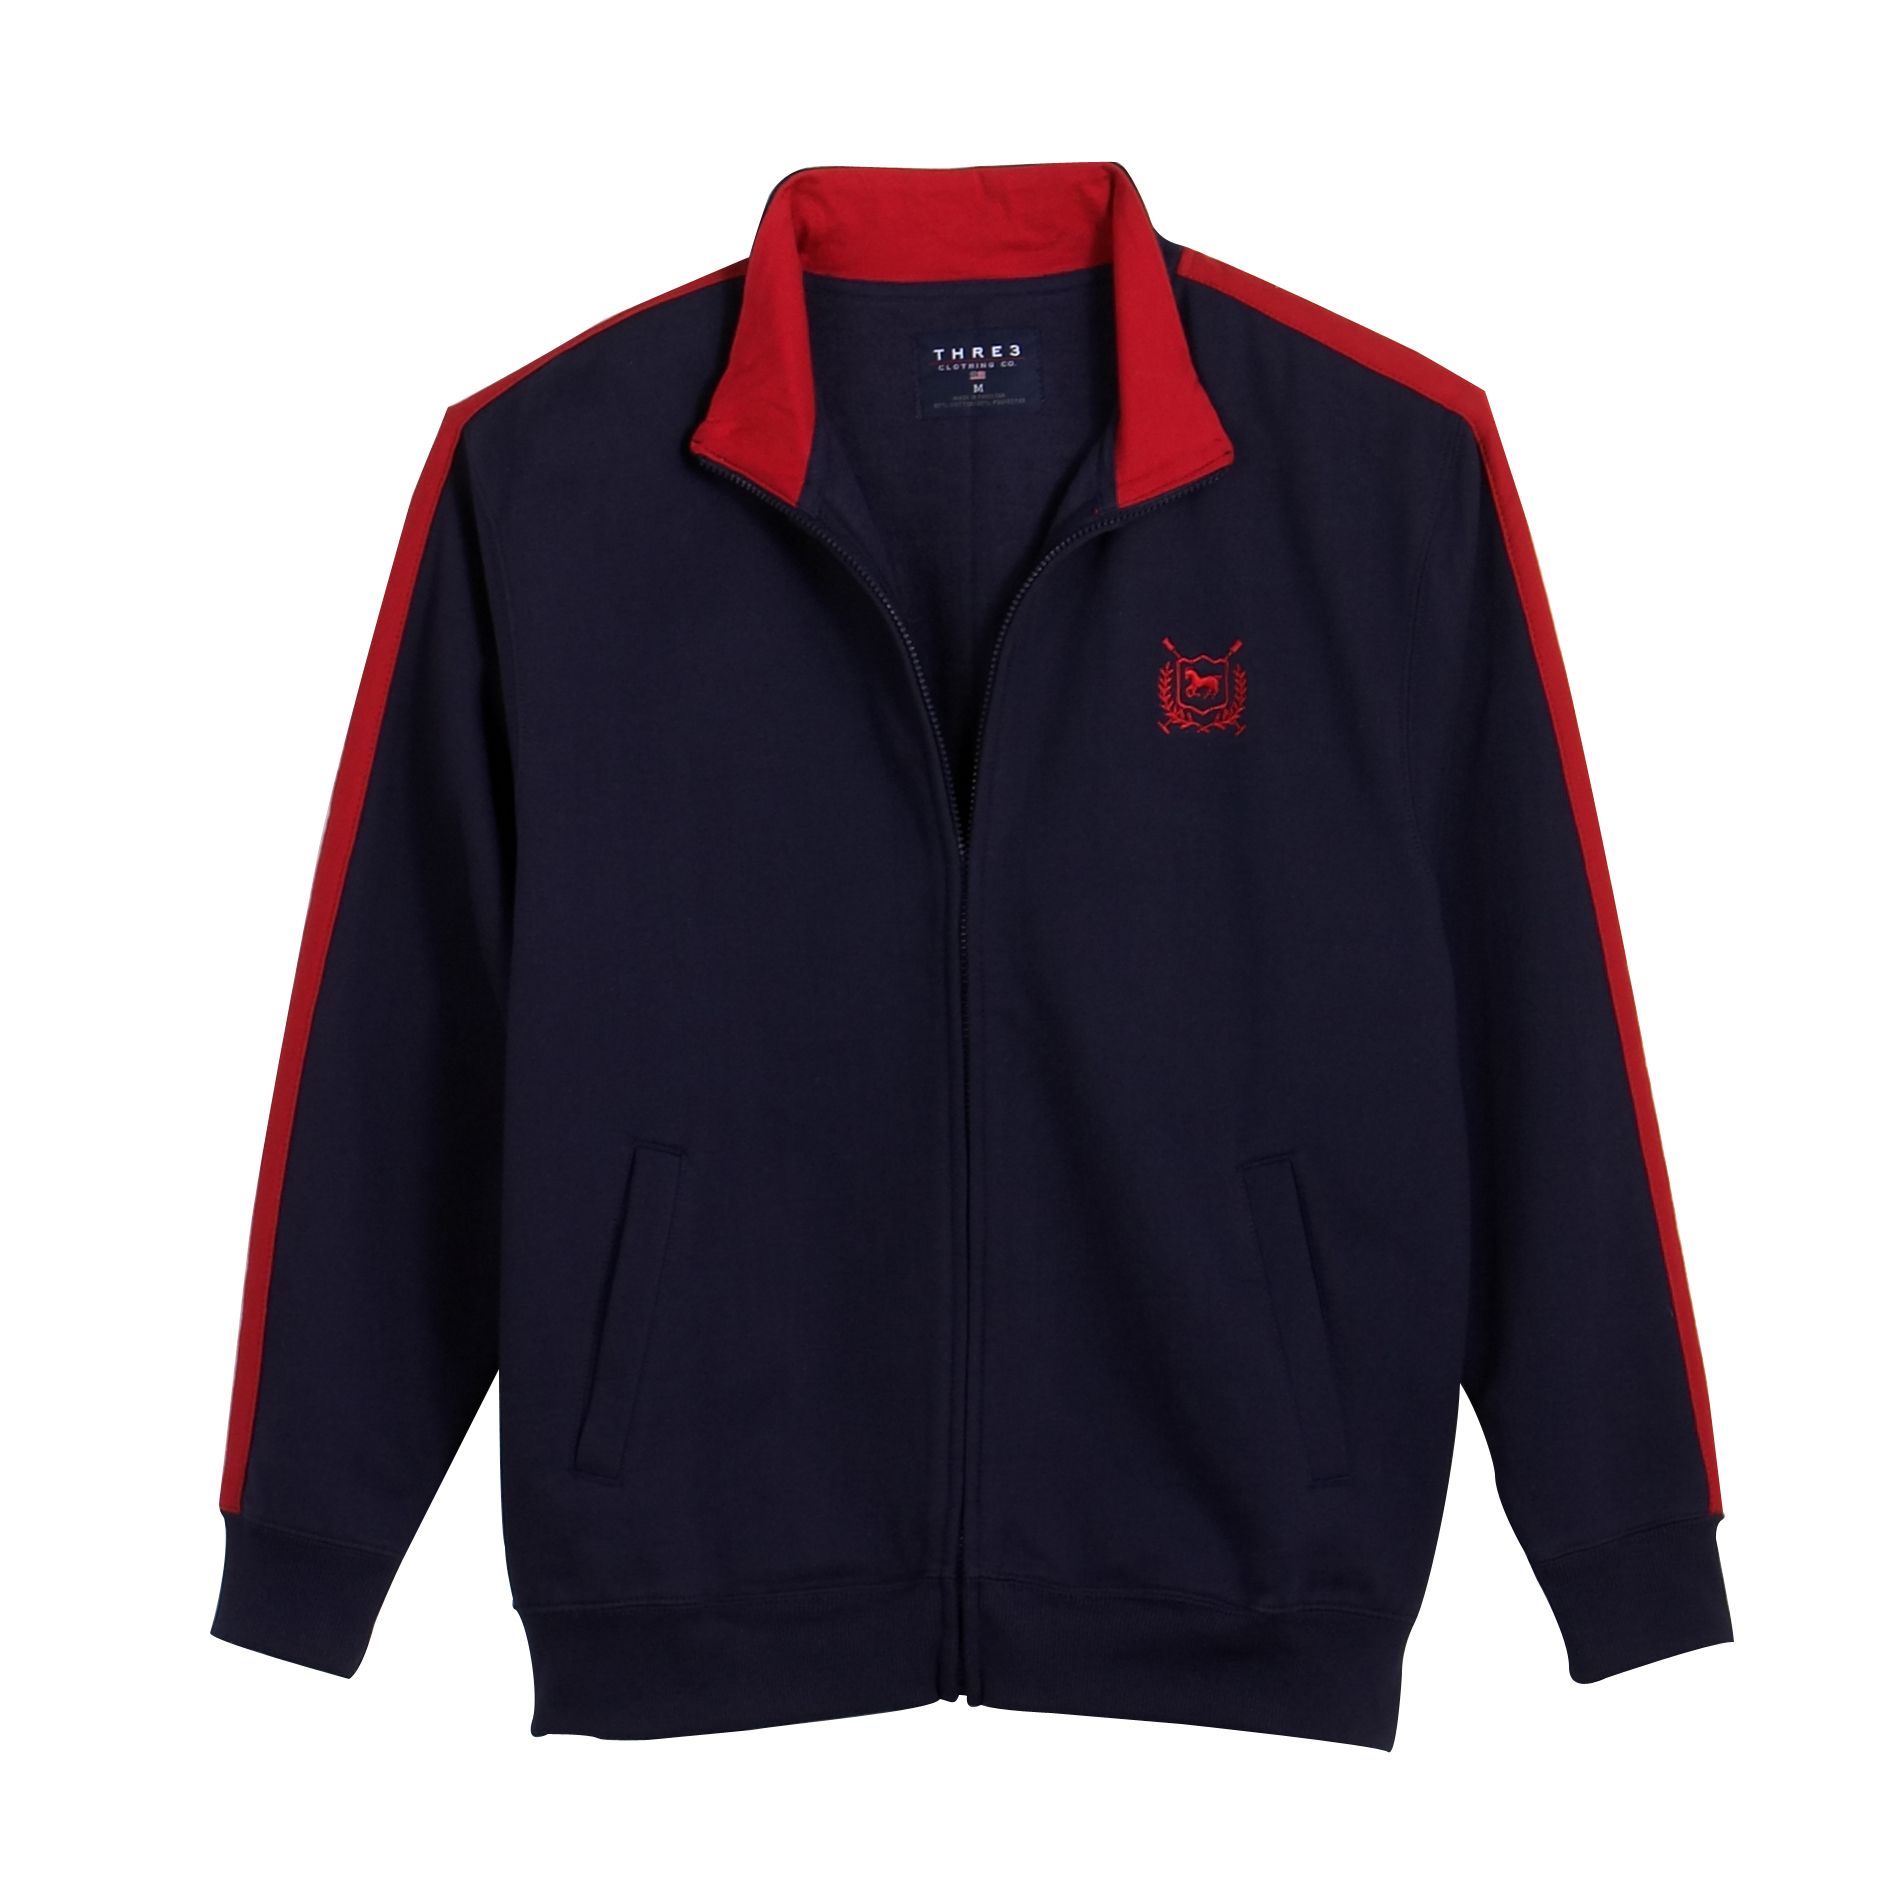 THRE3 by U.S. Polo Assn. Men's Long Sleeve Embroidered Track Jacket